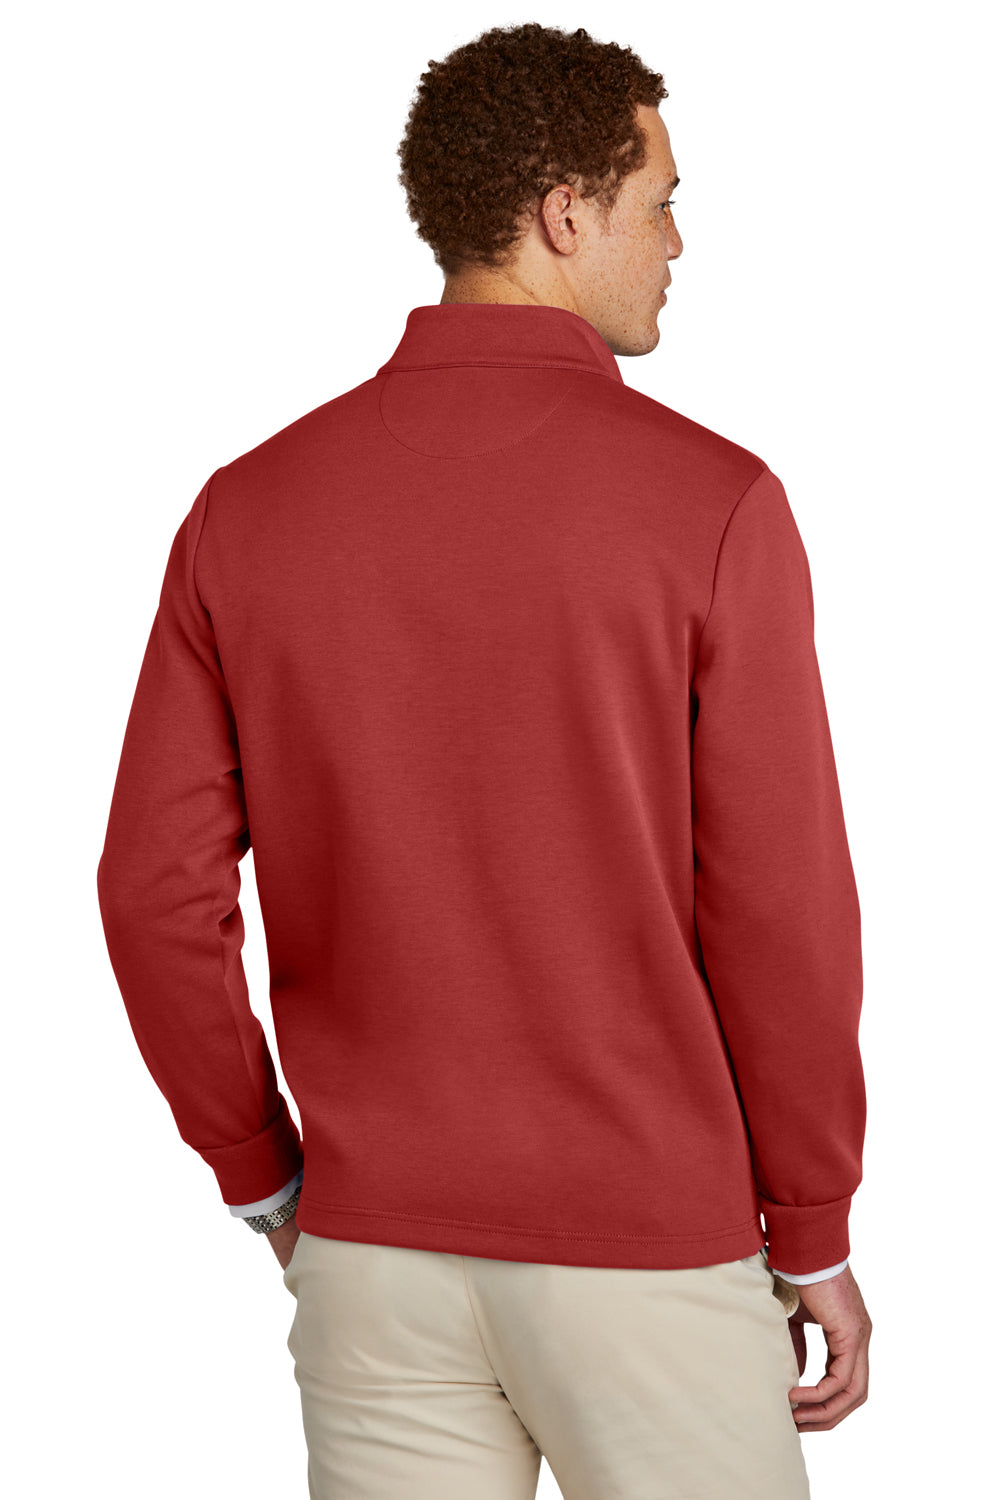 Brooks Brothers Mens Double Knit 1/4 Zip Sweatshirt Rich Red Model Back